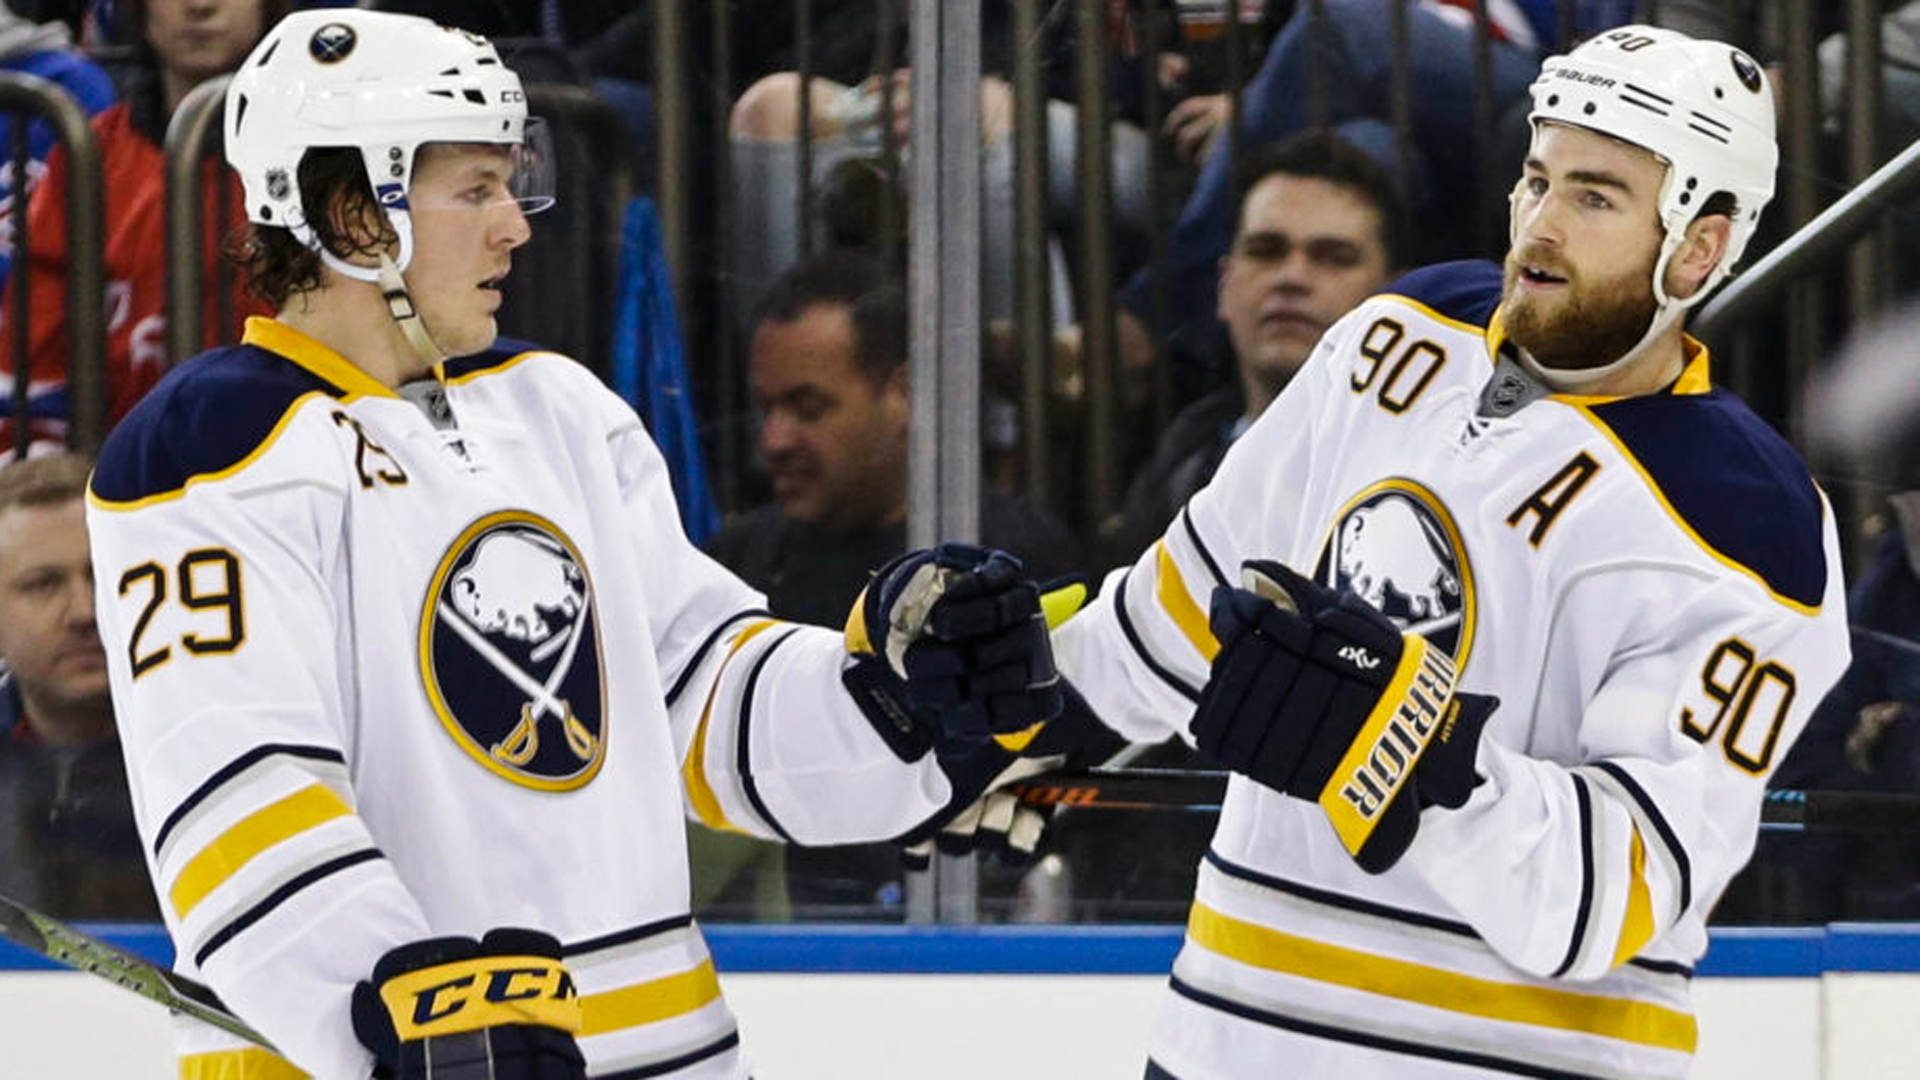 O'Reilly Has Career-High 4-Point Game in Sabres Win